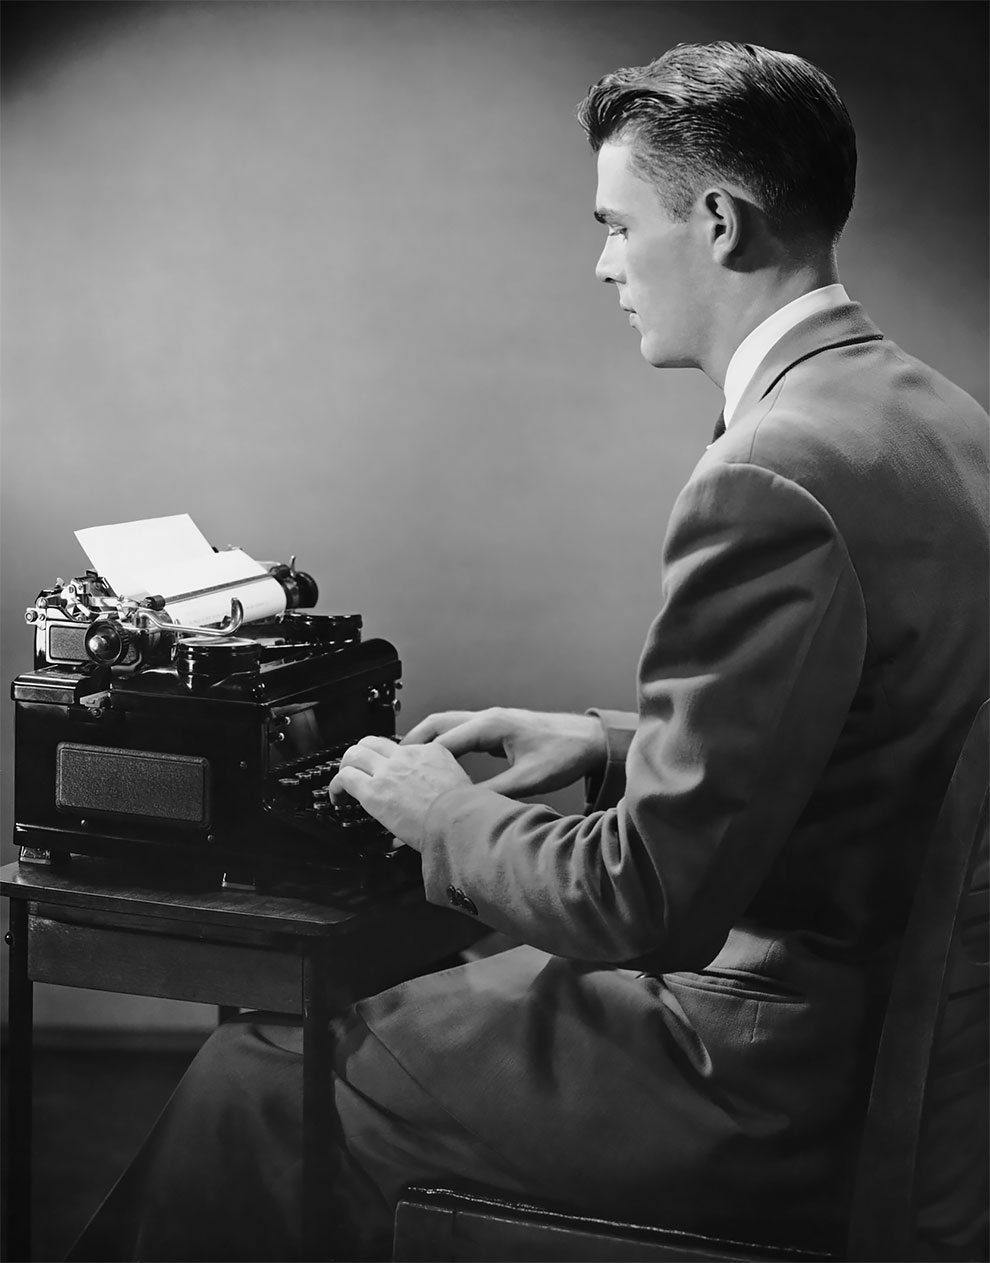 Woman Working At Typewriter by George Marks